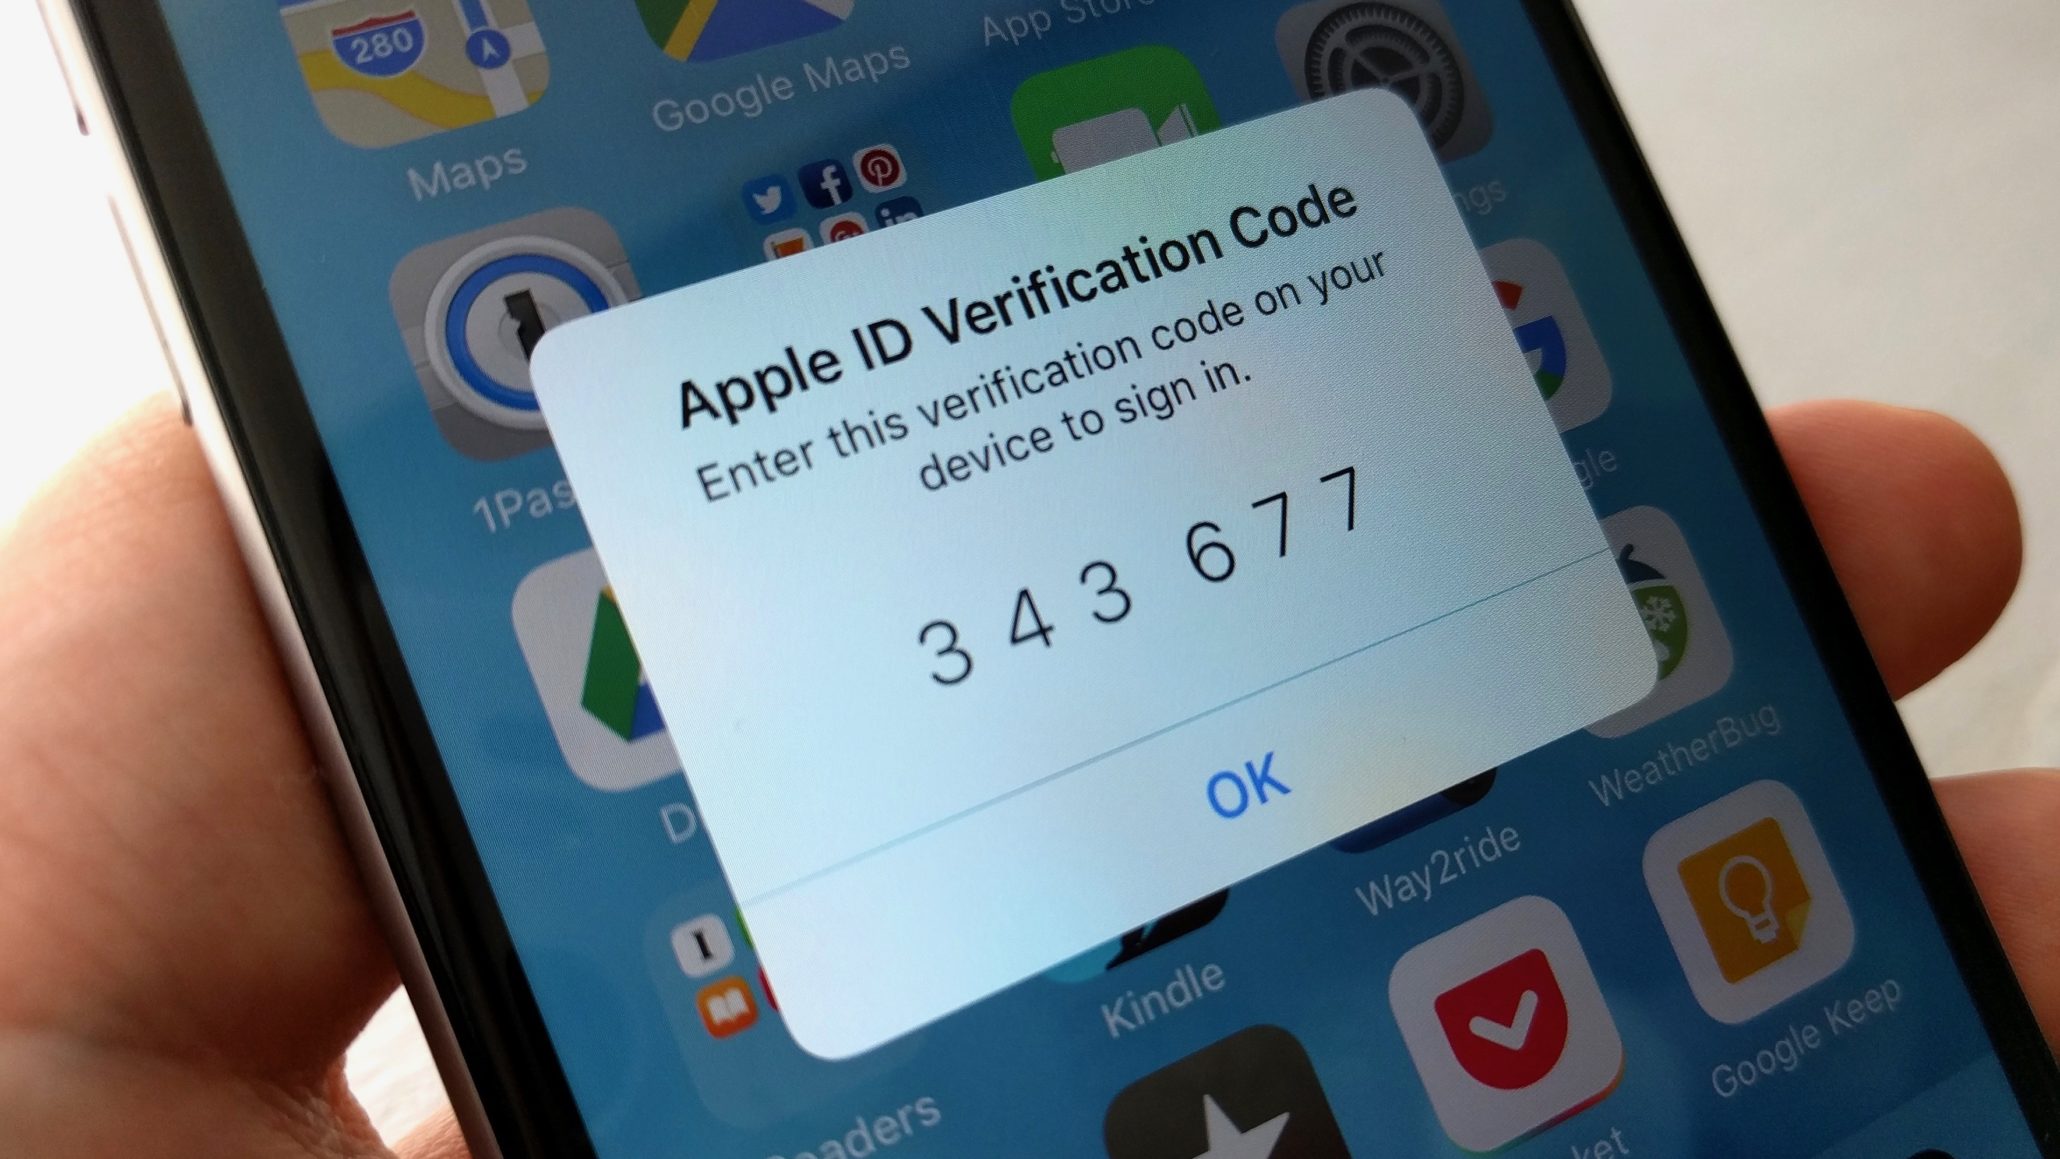 2fa Two Factor Authentication